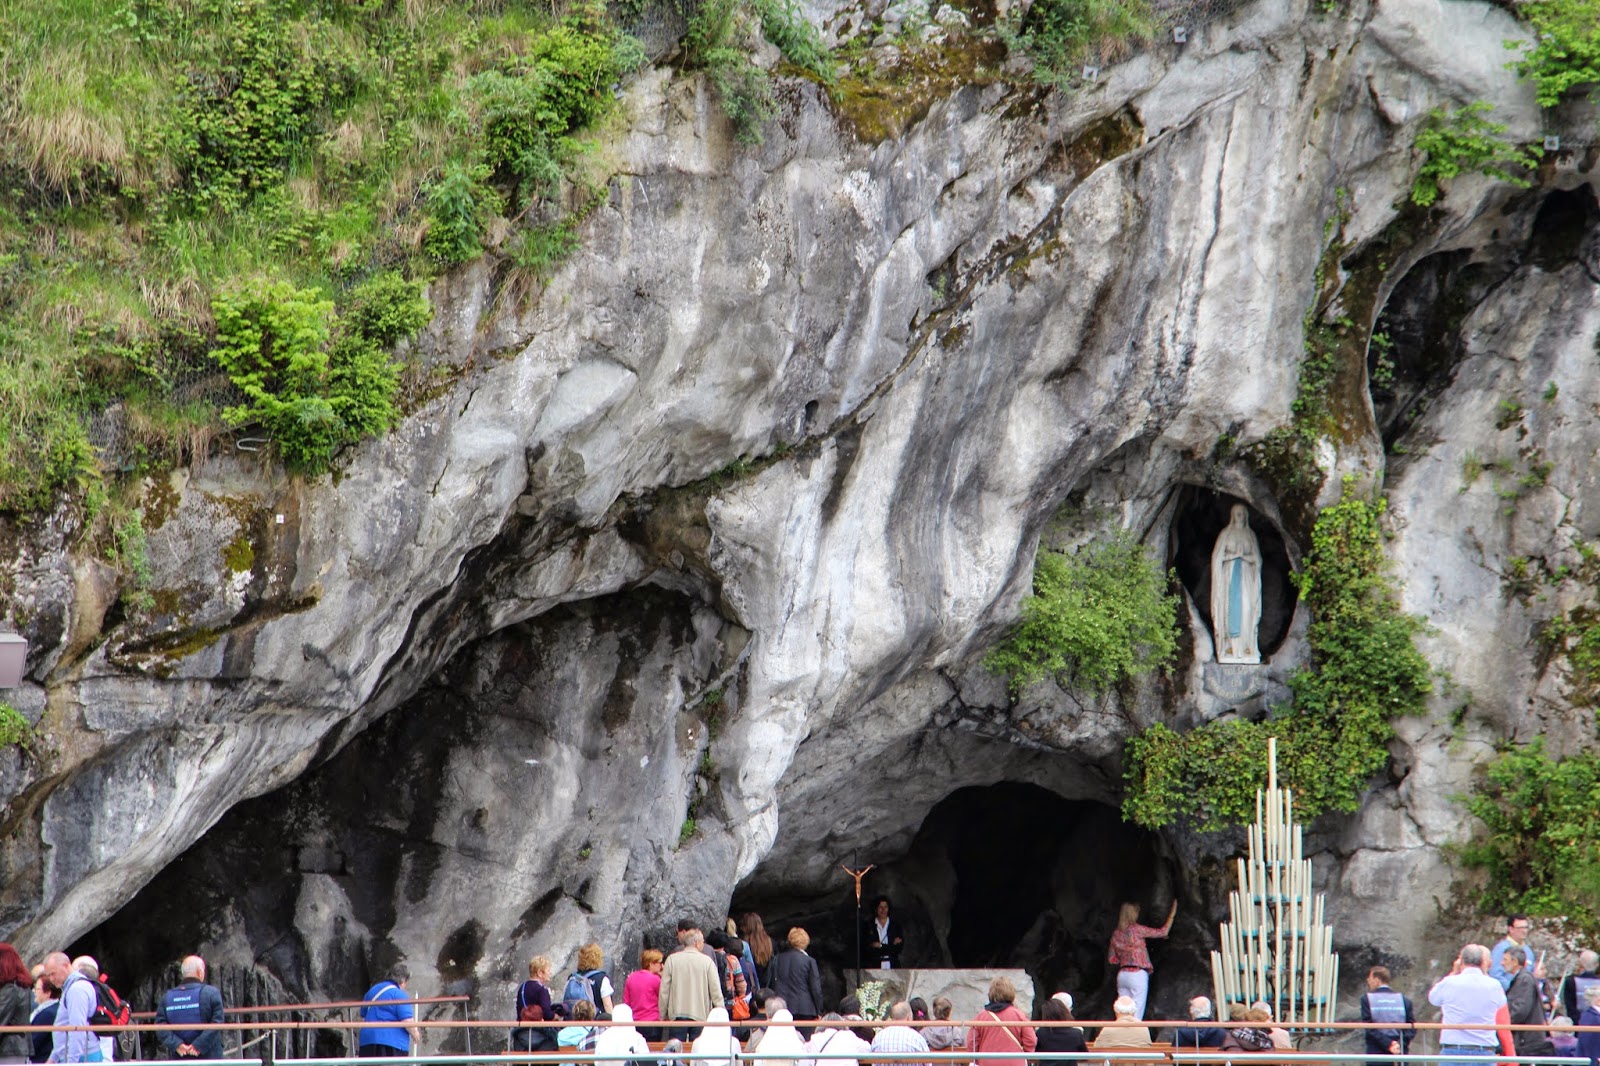 The Hank Chronicles: Day 3 Part Two: The Baths of Lourdes